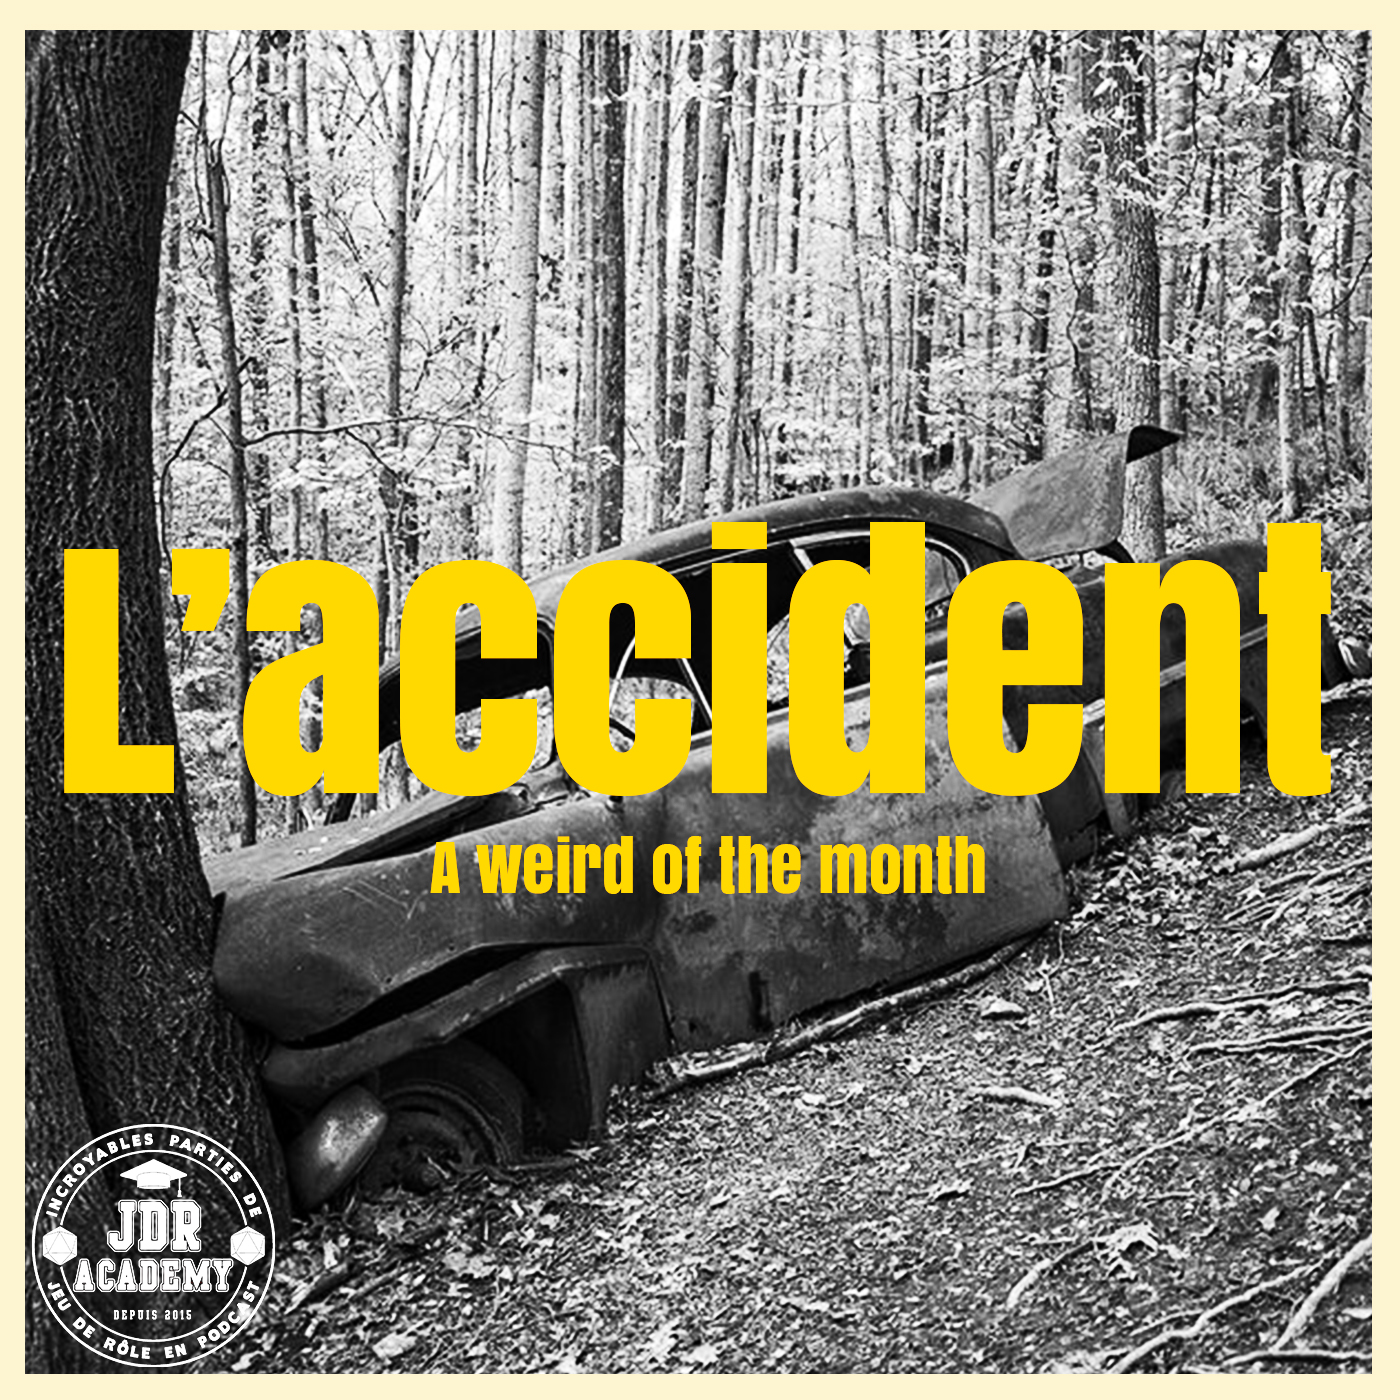 L’ACCIDENT (a weird of the month)